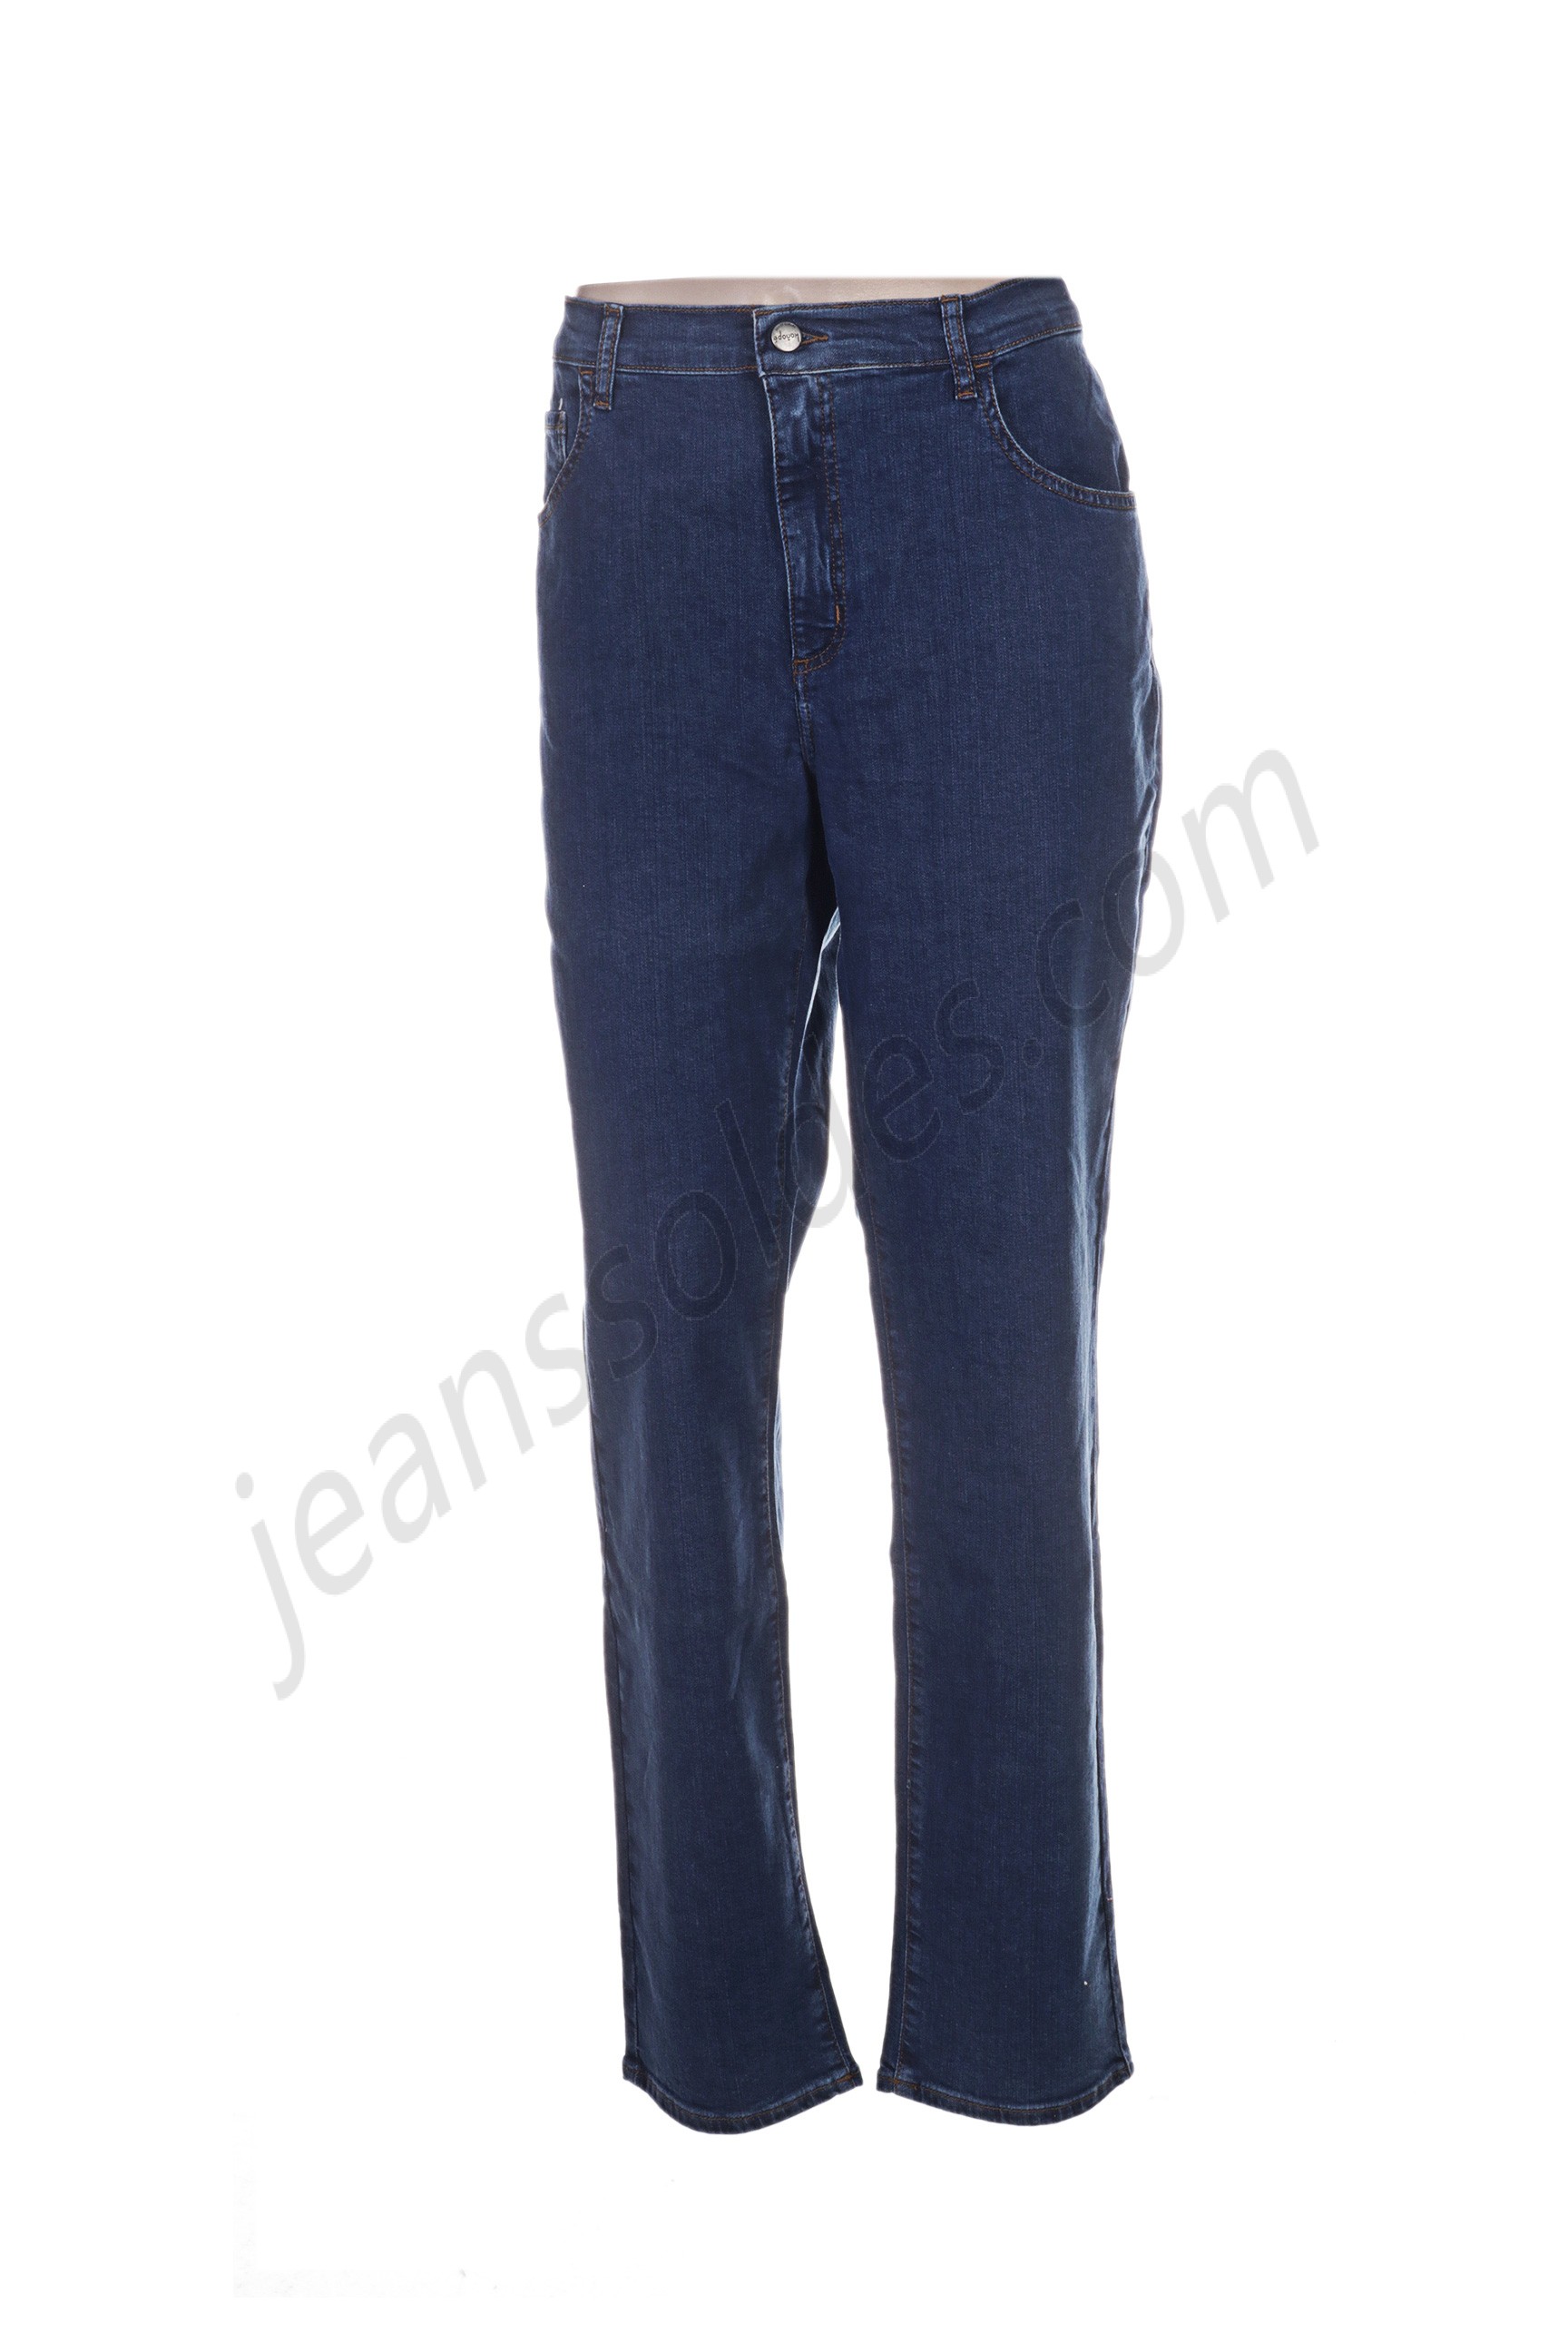 kanope-Jeans coupe droite prix d’amis - kanope-Jeans coupe droite prix d’amis